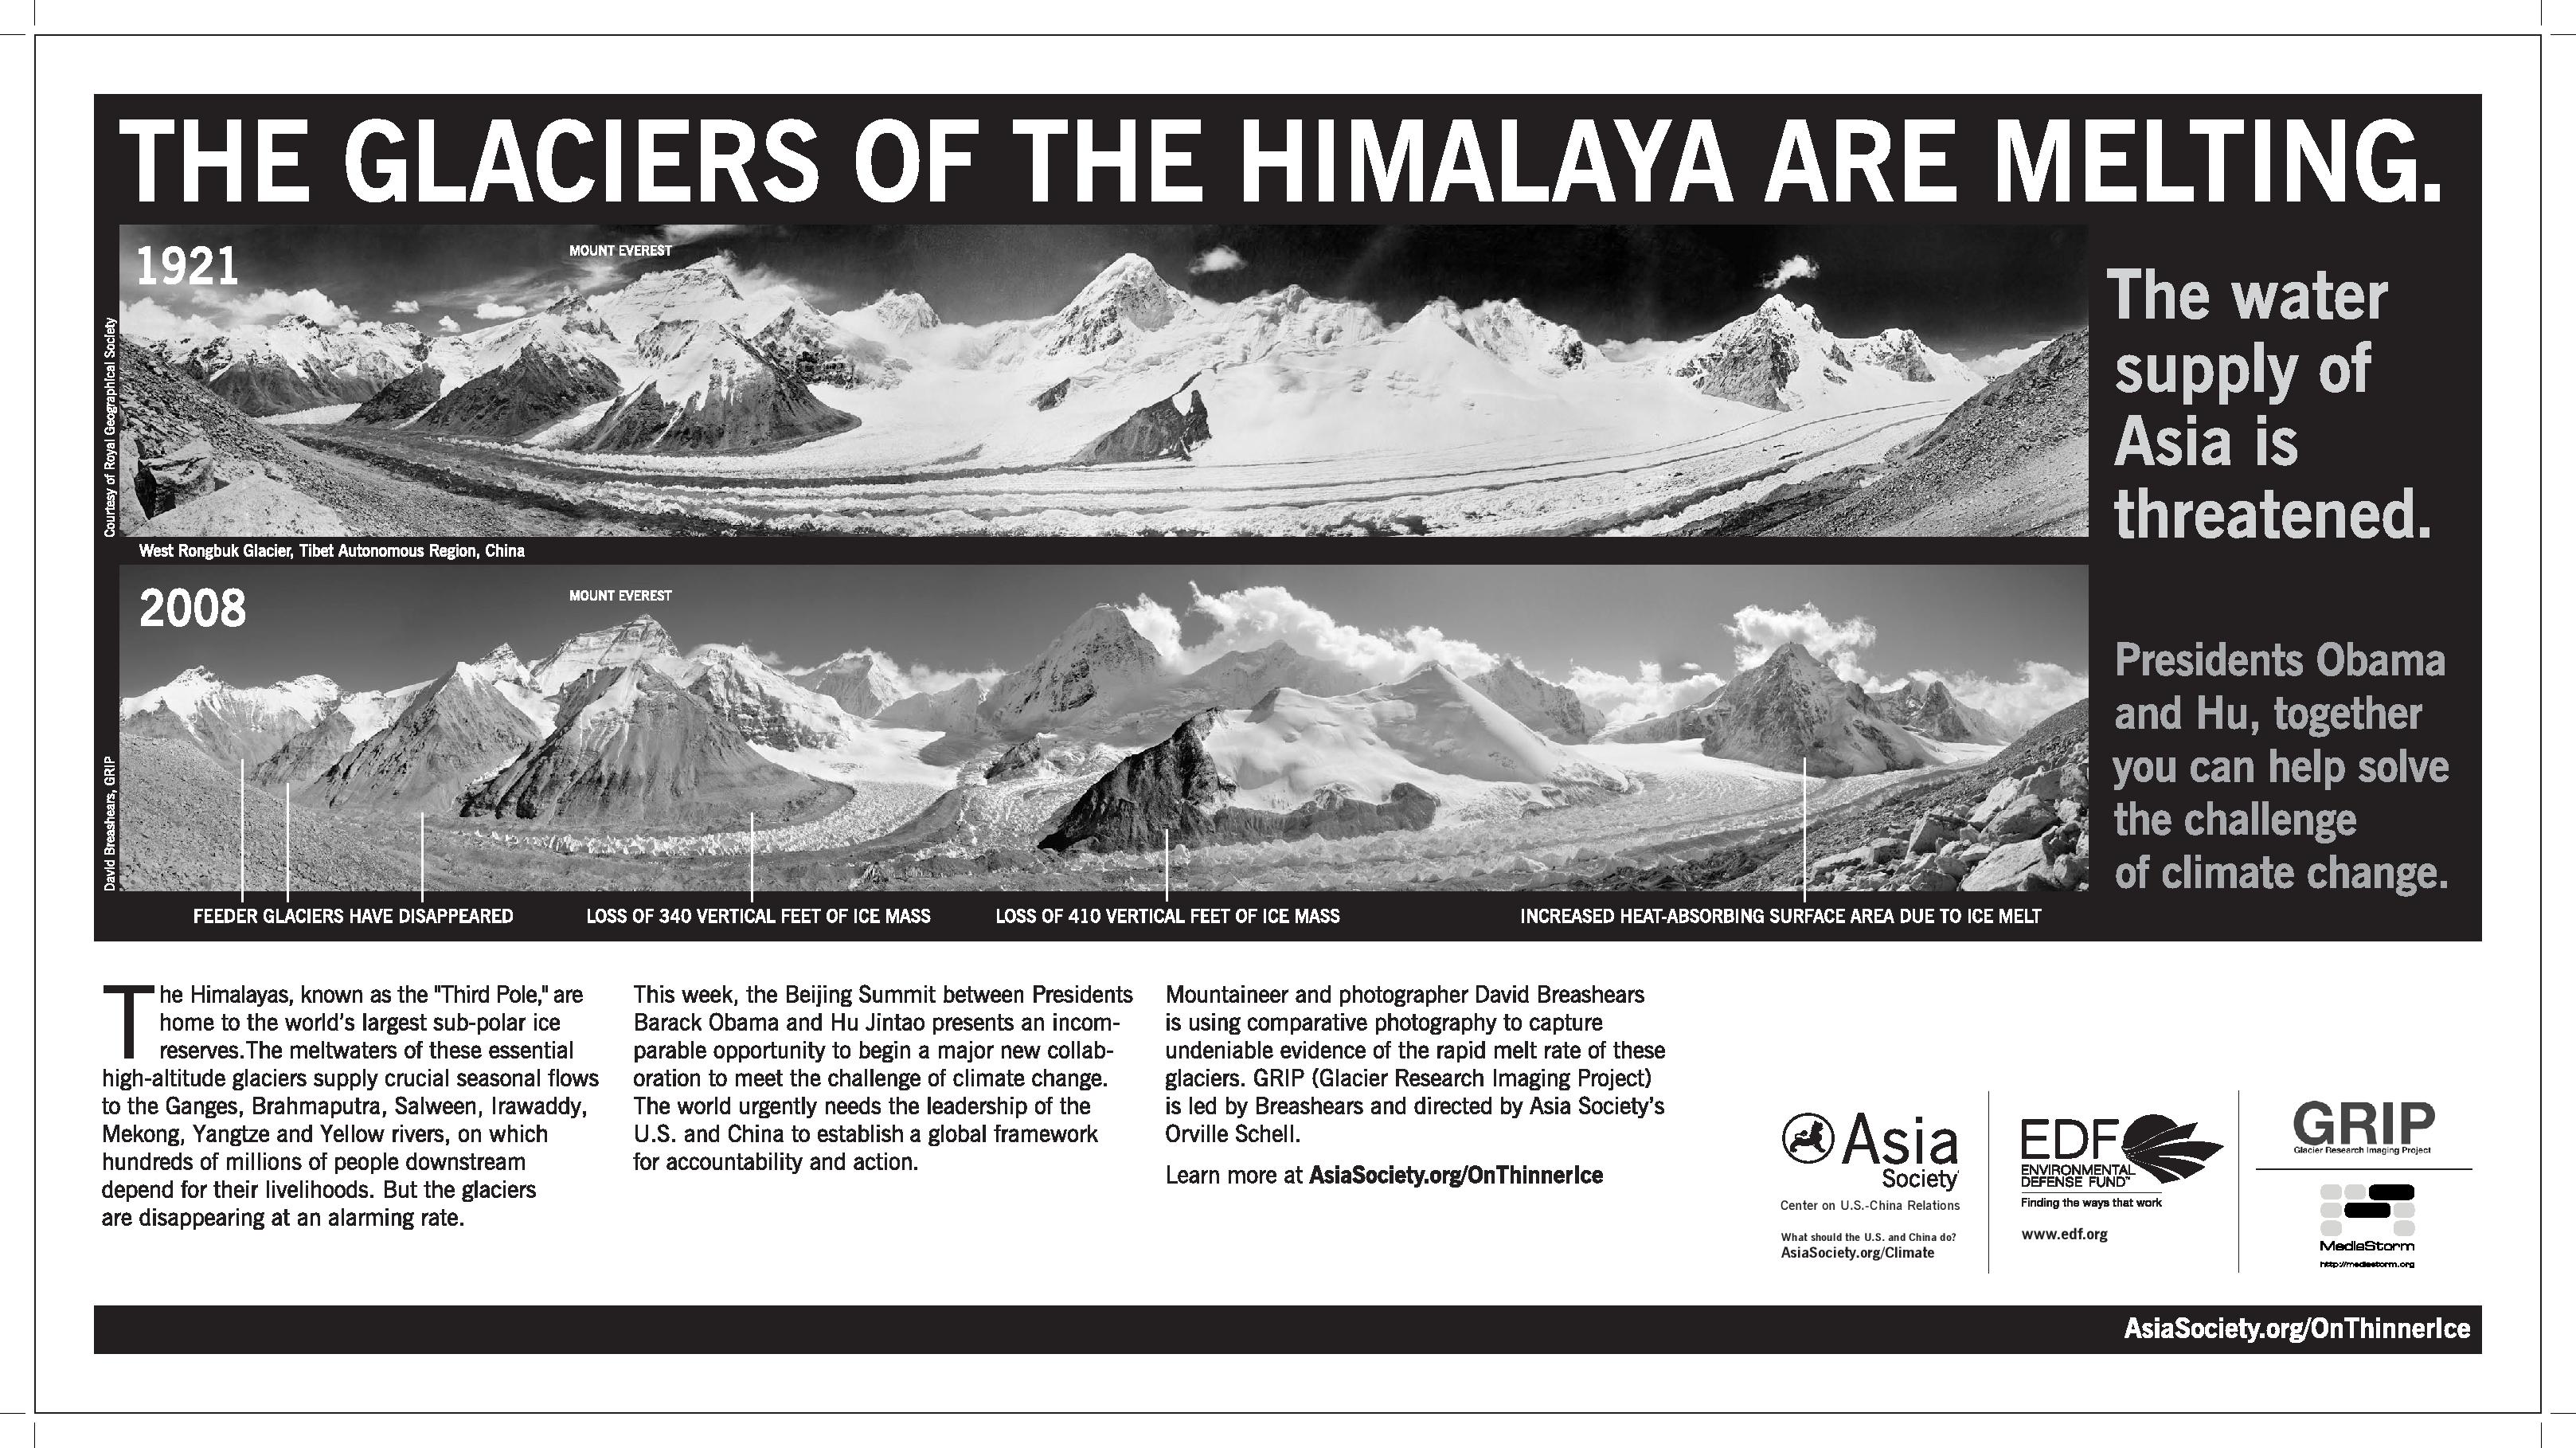 The Glaciers of the Himalaya are Melting